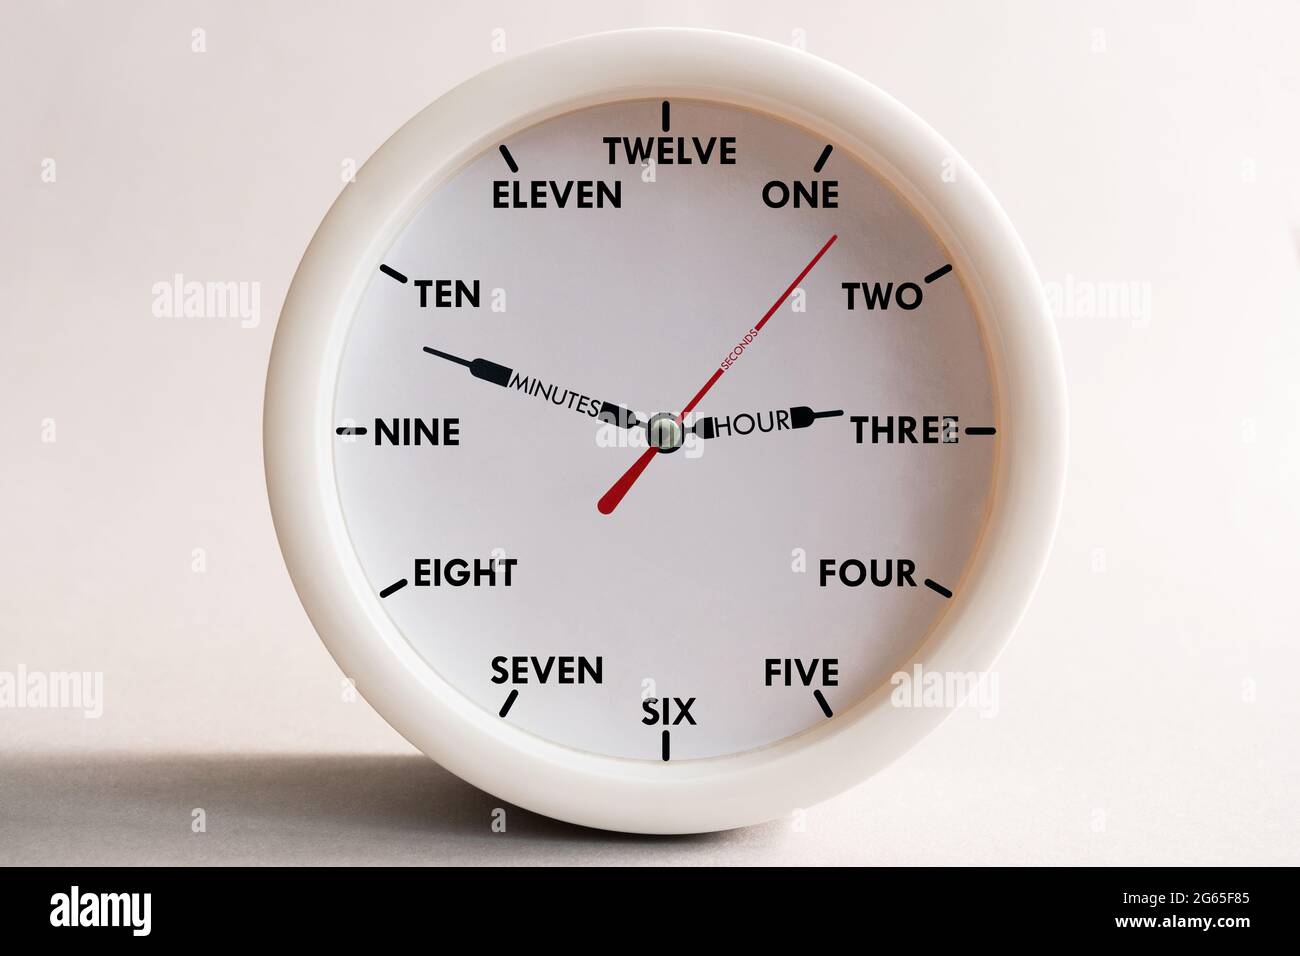 Hour dial with numbers spelled out in words for teaching children to count, language and time orientation by the clock. Stock Photo